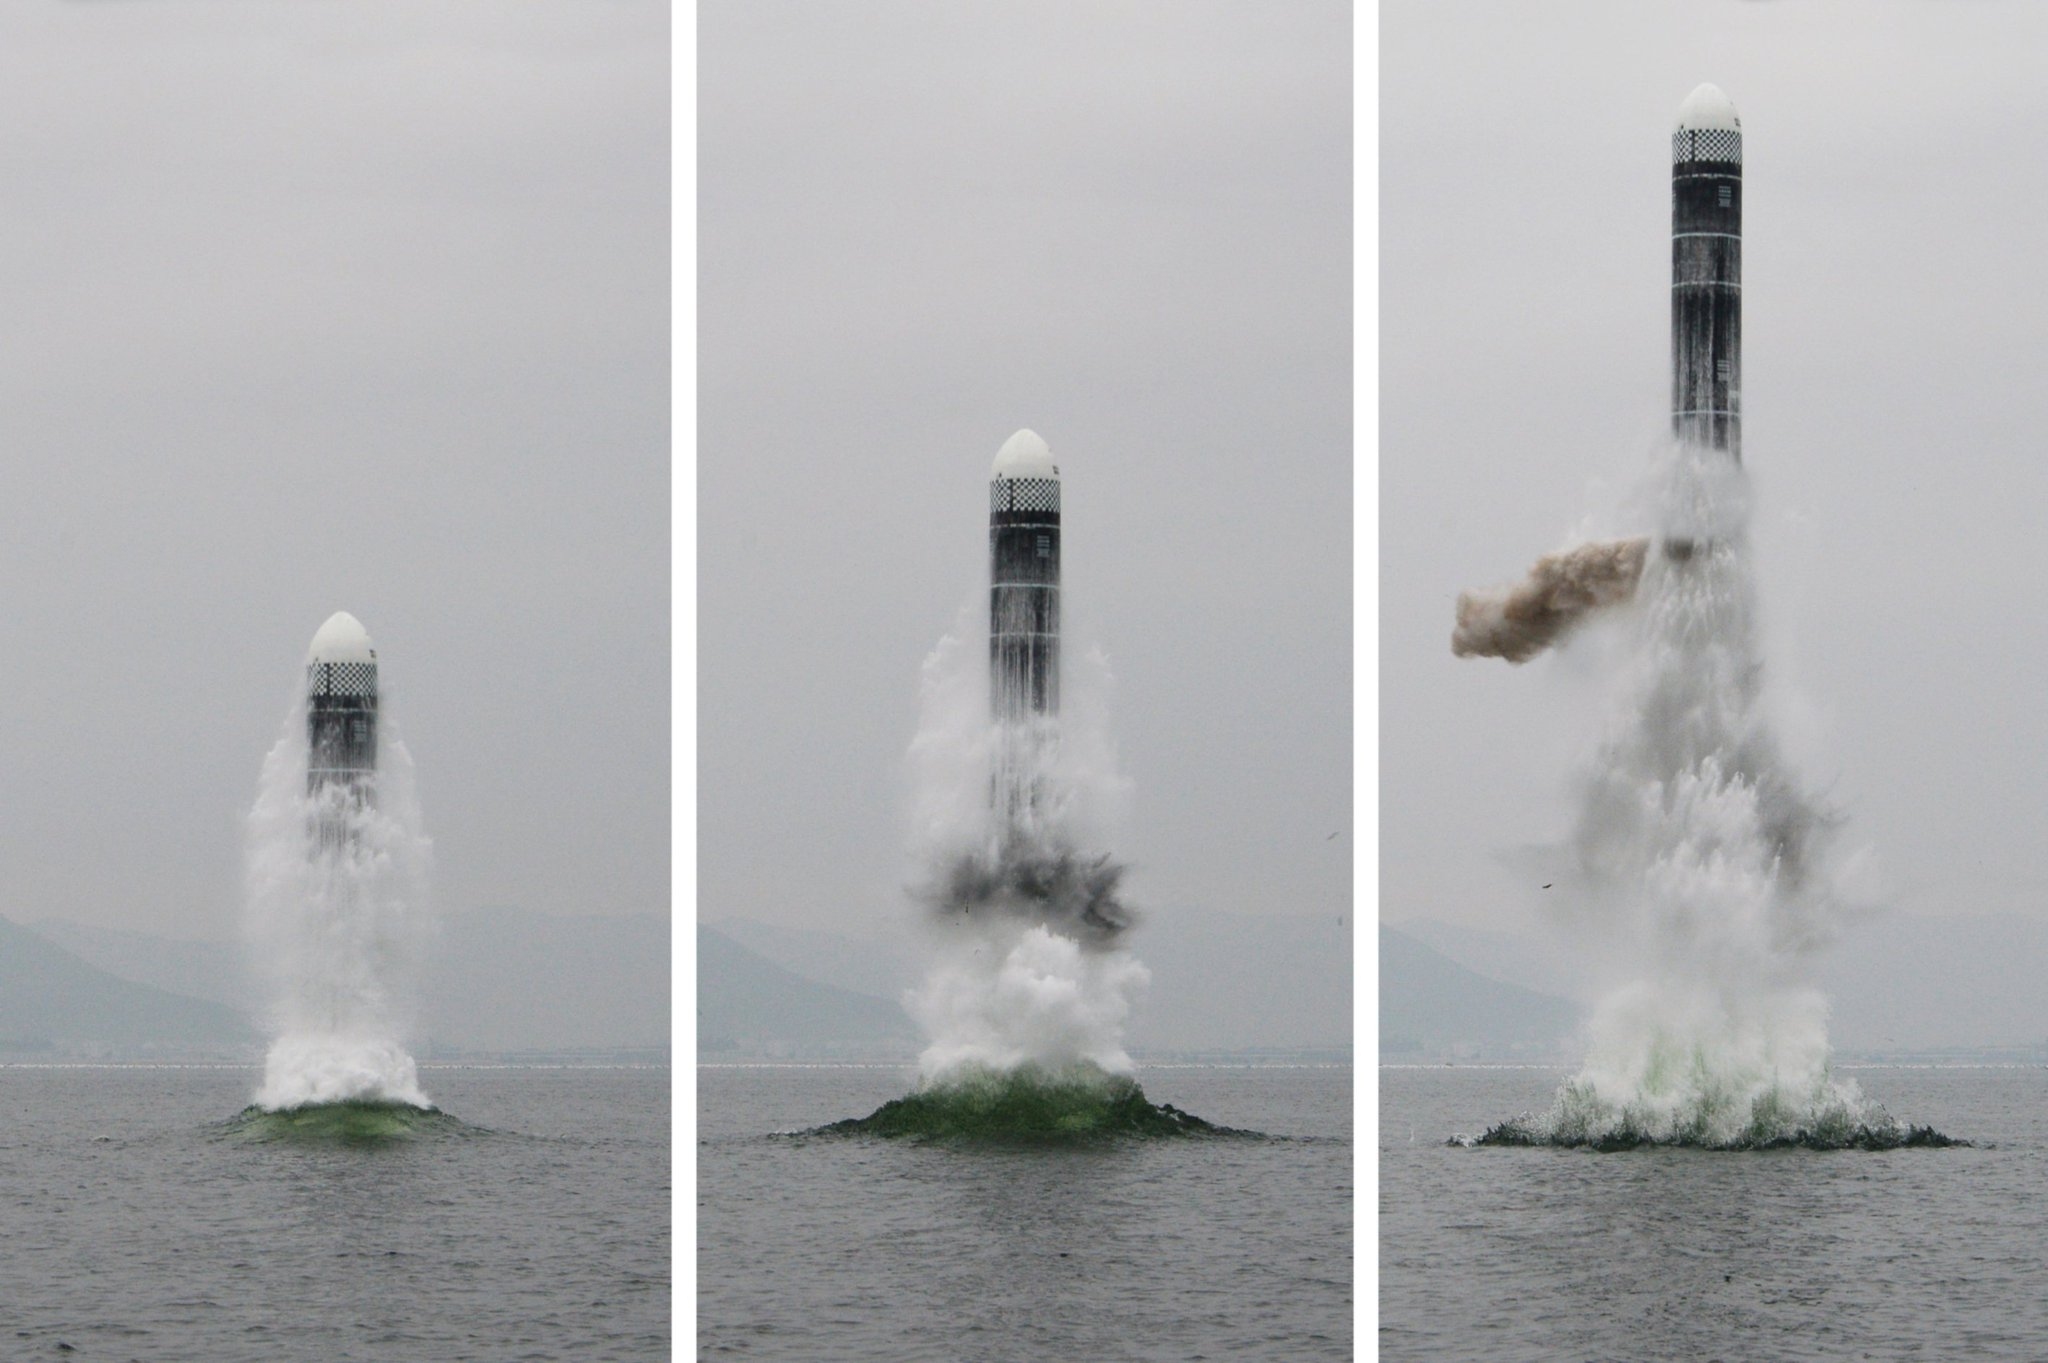 North Korea Completes Building Submarine-launched Ballistic Missiles (SLBMs)